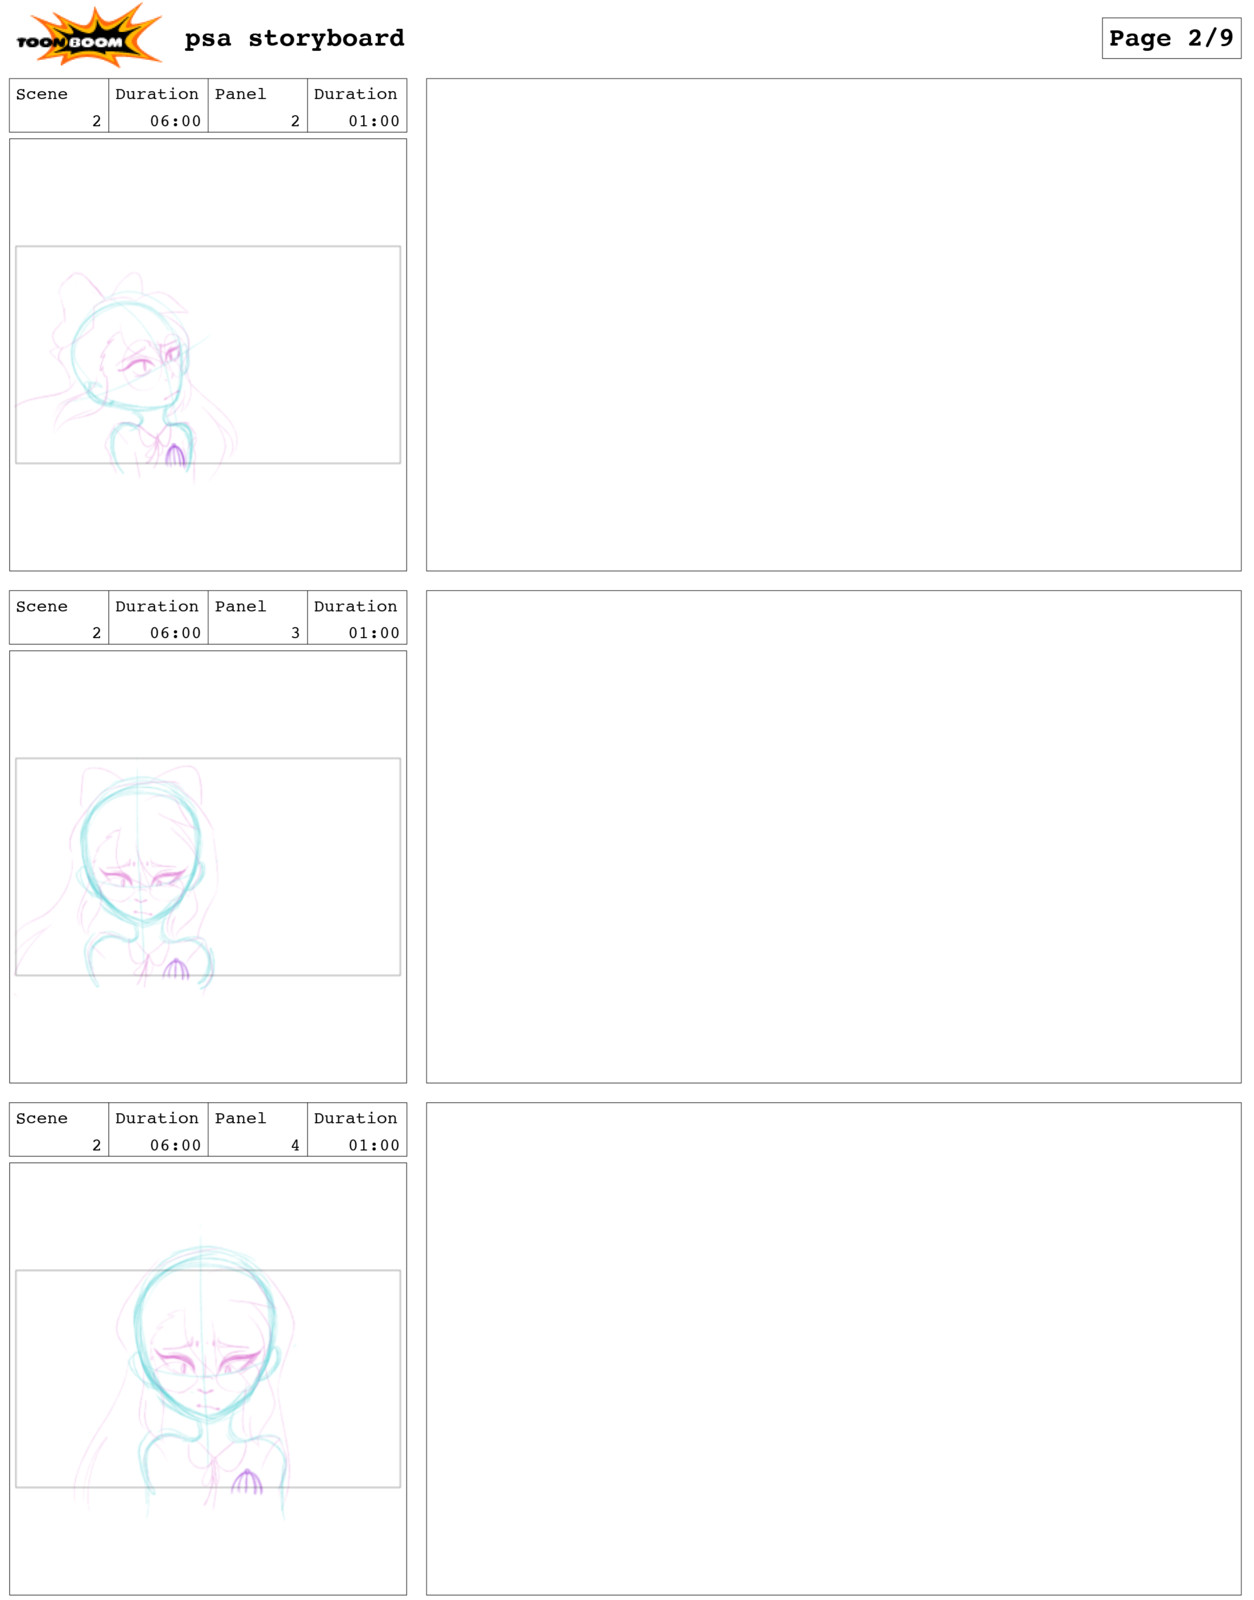 Page 2 of storyboard.